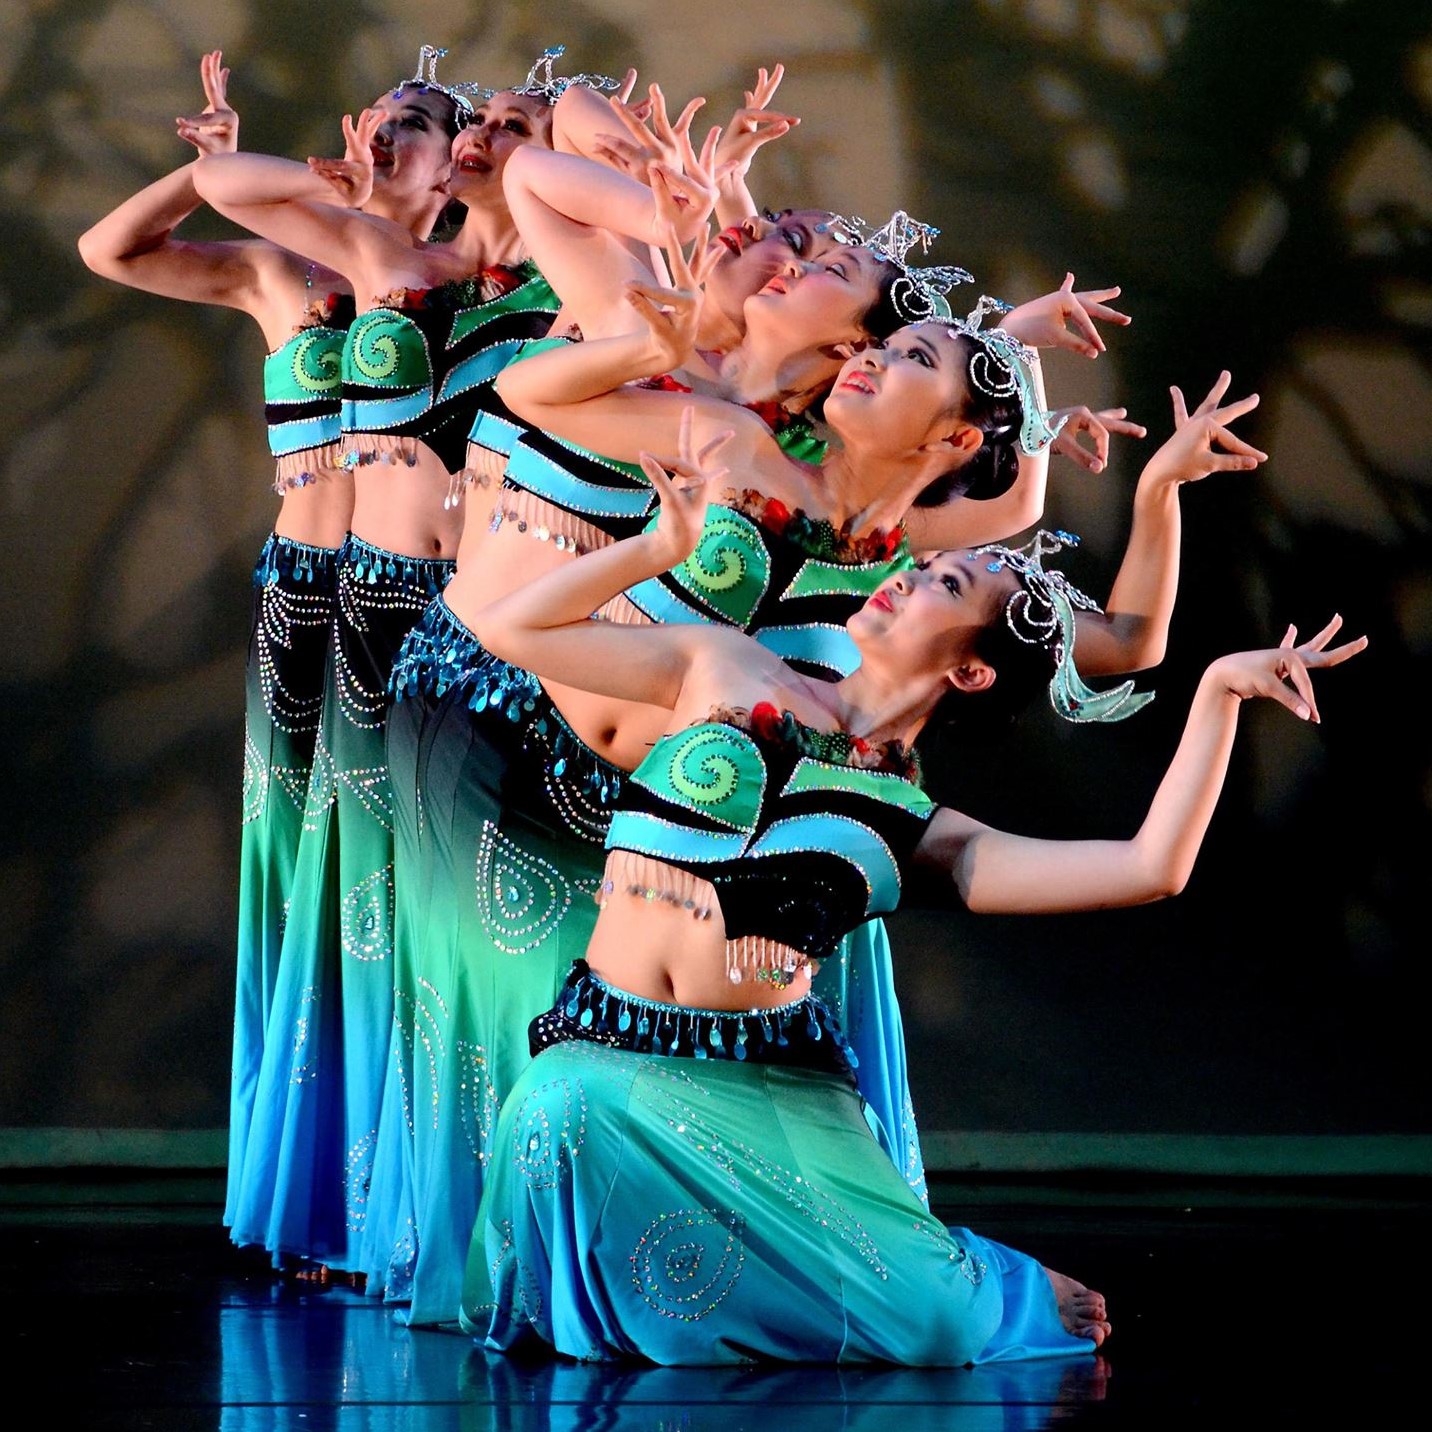 The photo depicts a group of women from the Lorita Leung Dance Academy dancing and making poses with their hands. They are dressed in dance attire and are likely performing choreographed routines from various dance styles such as modern dance or belly dance.